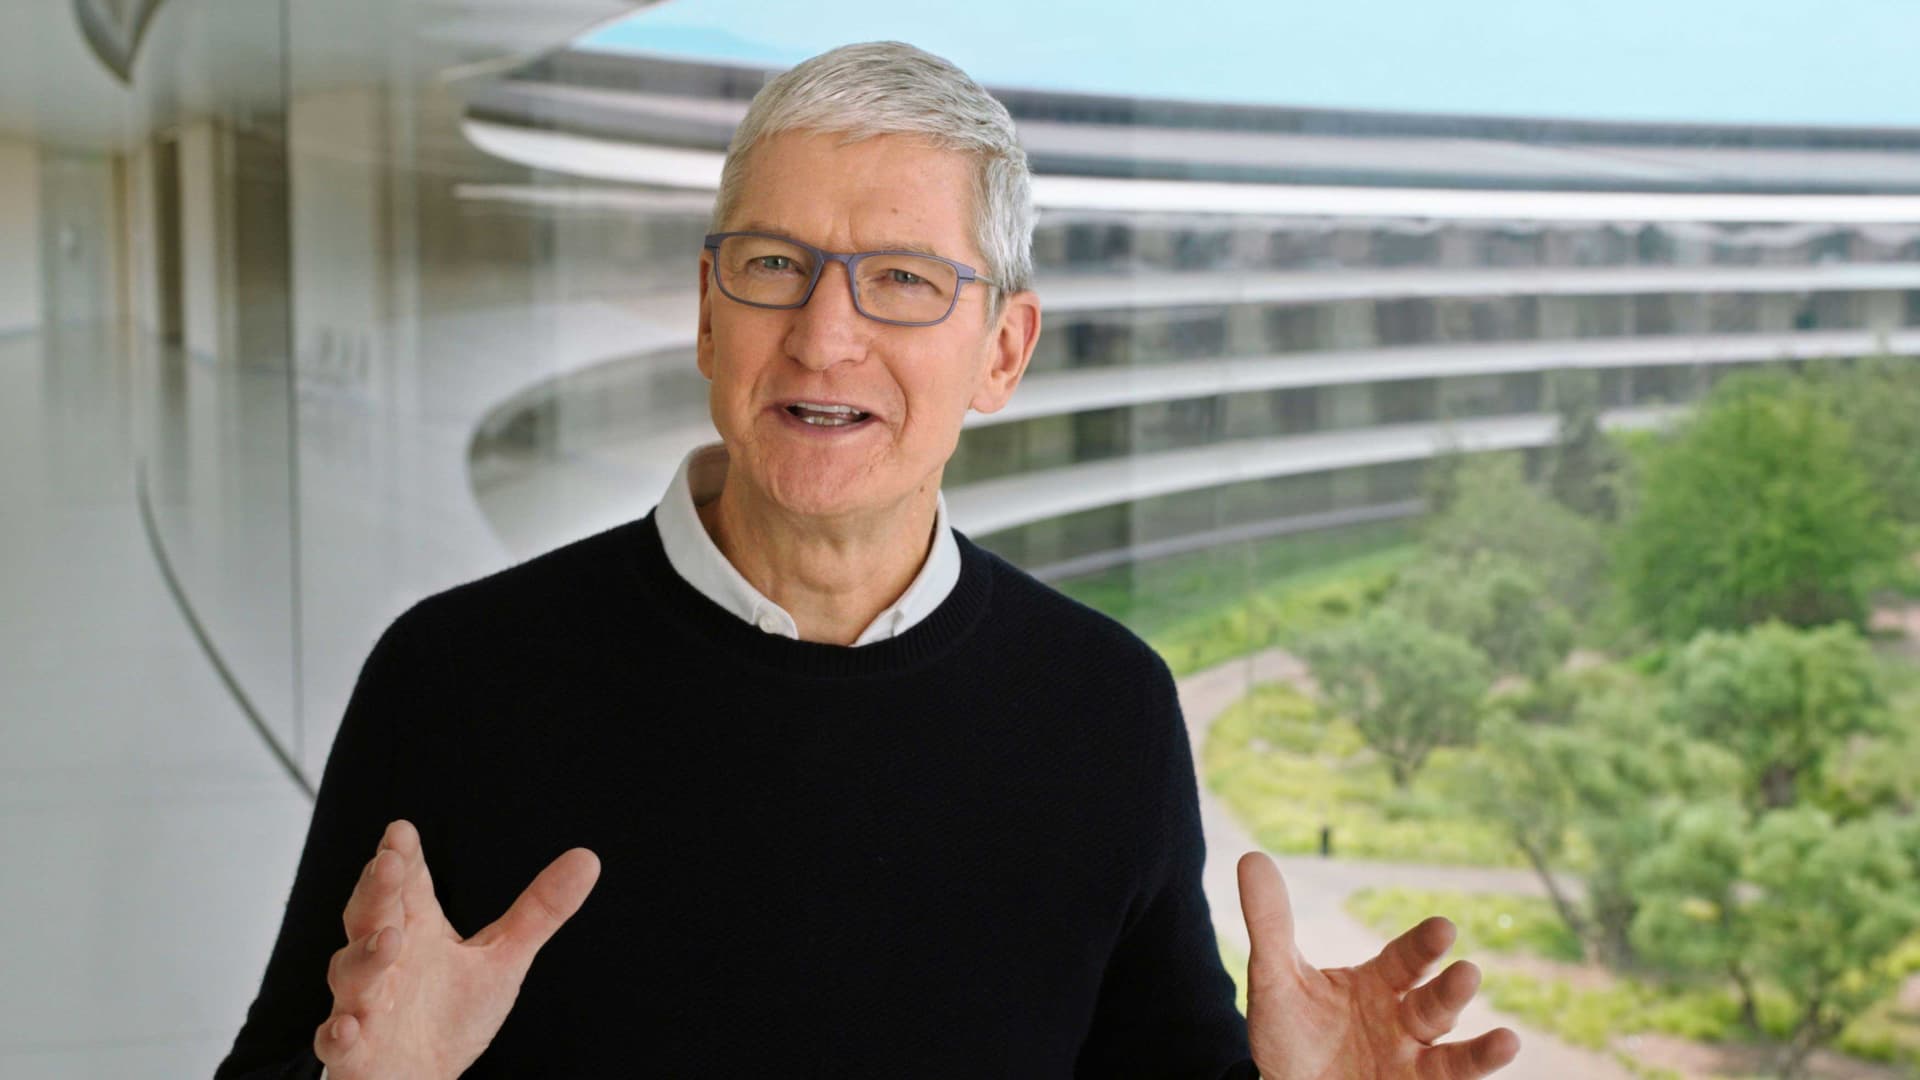 Apple CEO Tim Cook speaks during a special event at the company's headquarters of Apple Park in a still image from video taken in Cupertino, California, U.S. September 15, 2020.